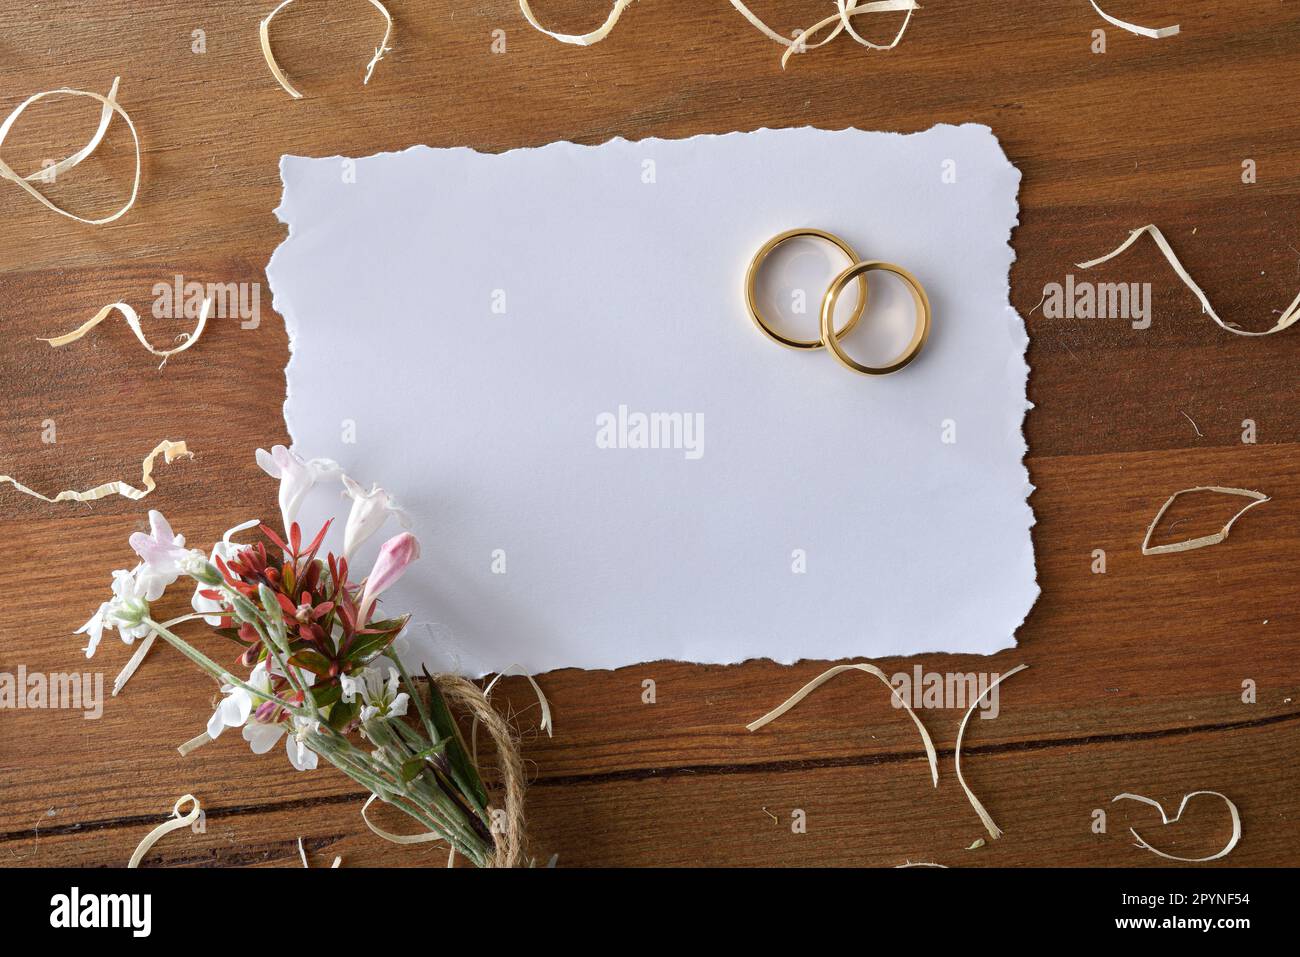 detail of two gold rings on a rustic wooden table with straw and sackcloth for decoration and a white isolated background front view 2PYNF54